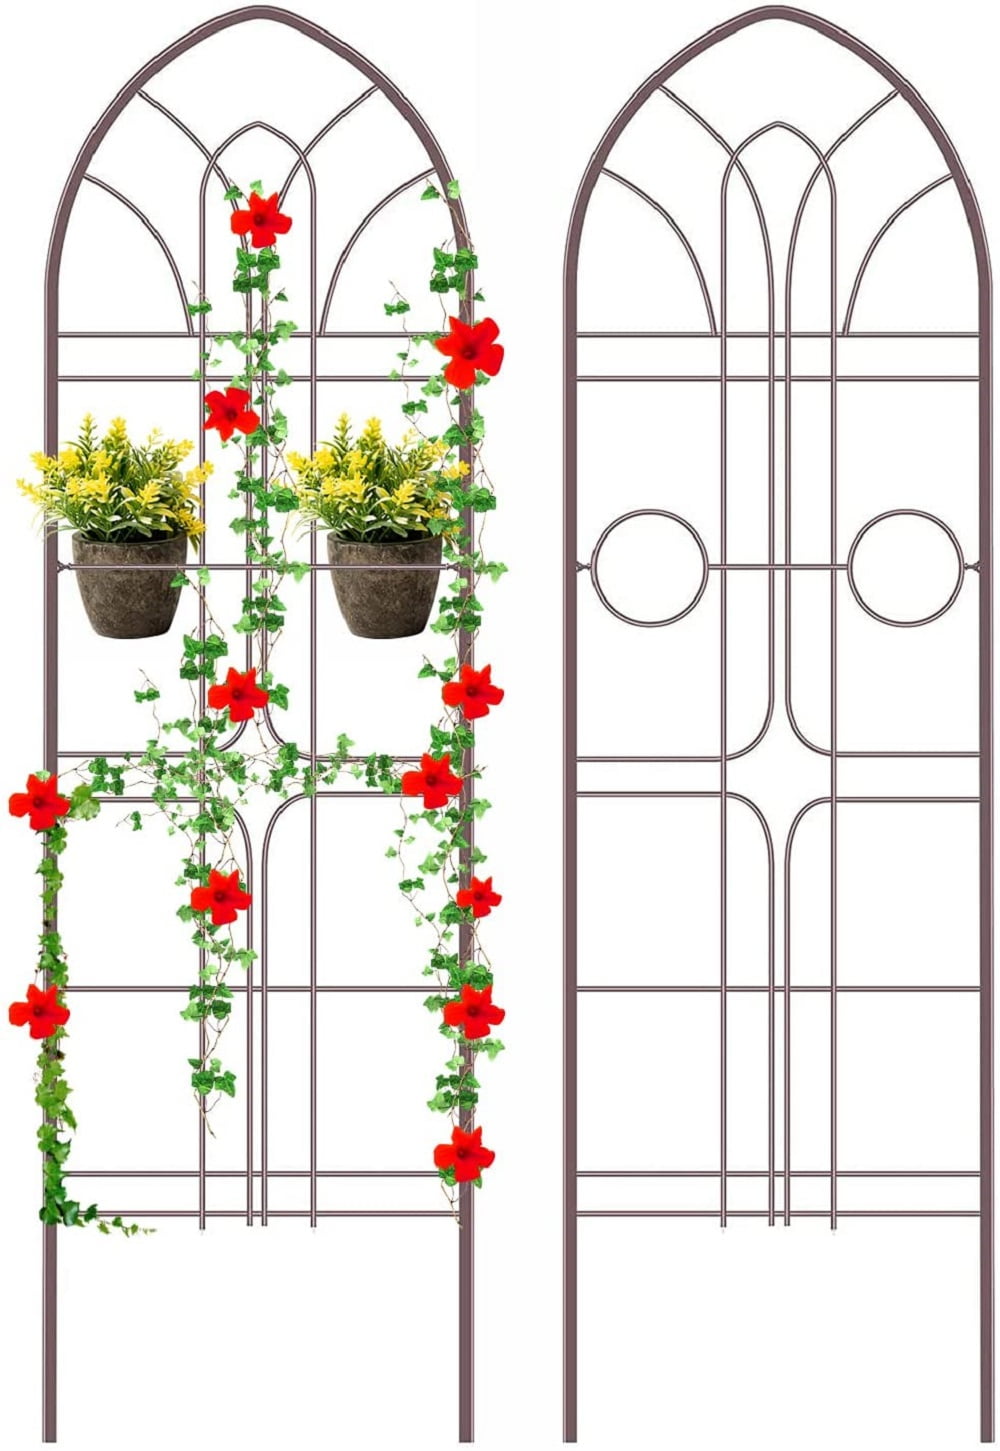 Garden Trellis for Climbing Outdoor Plants Potted Plants Flowers 2 Wood Panels 